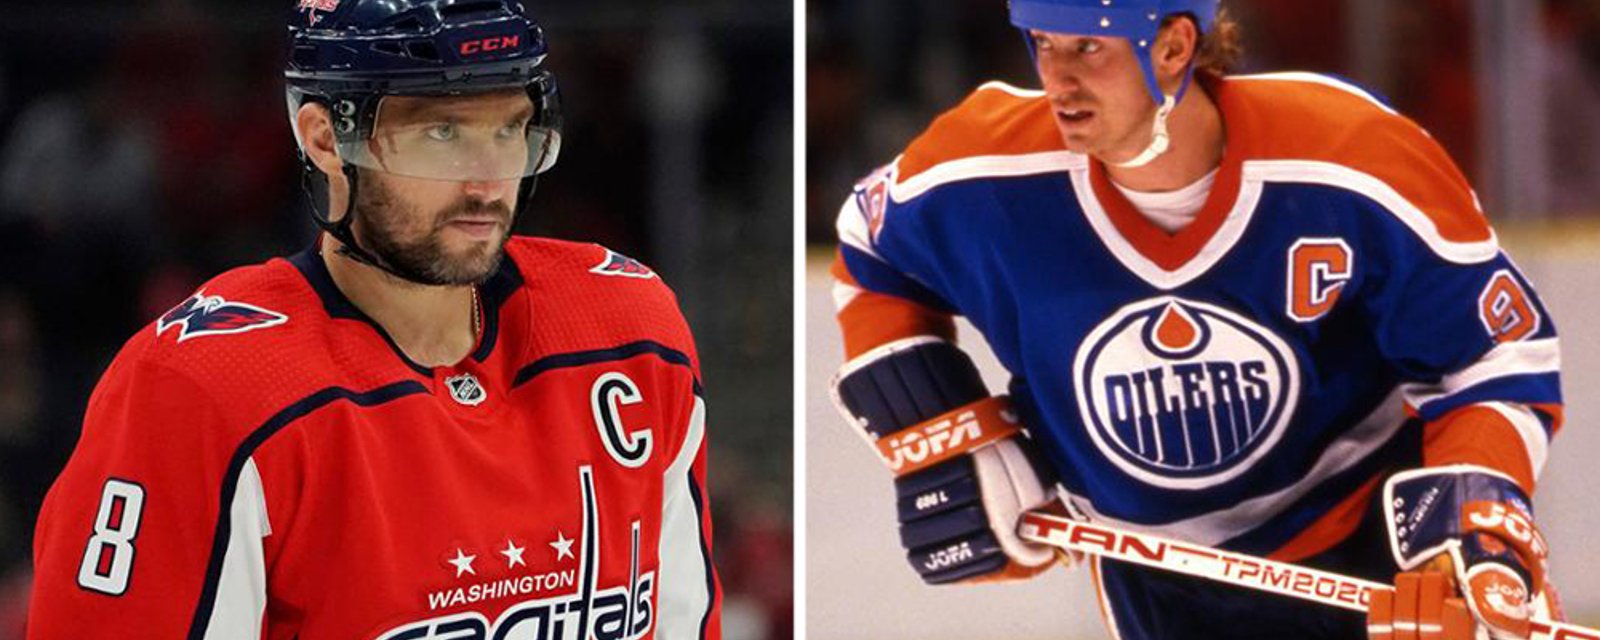 Gretzky vs Ovechkin go head to head this April 22nd